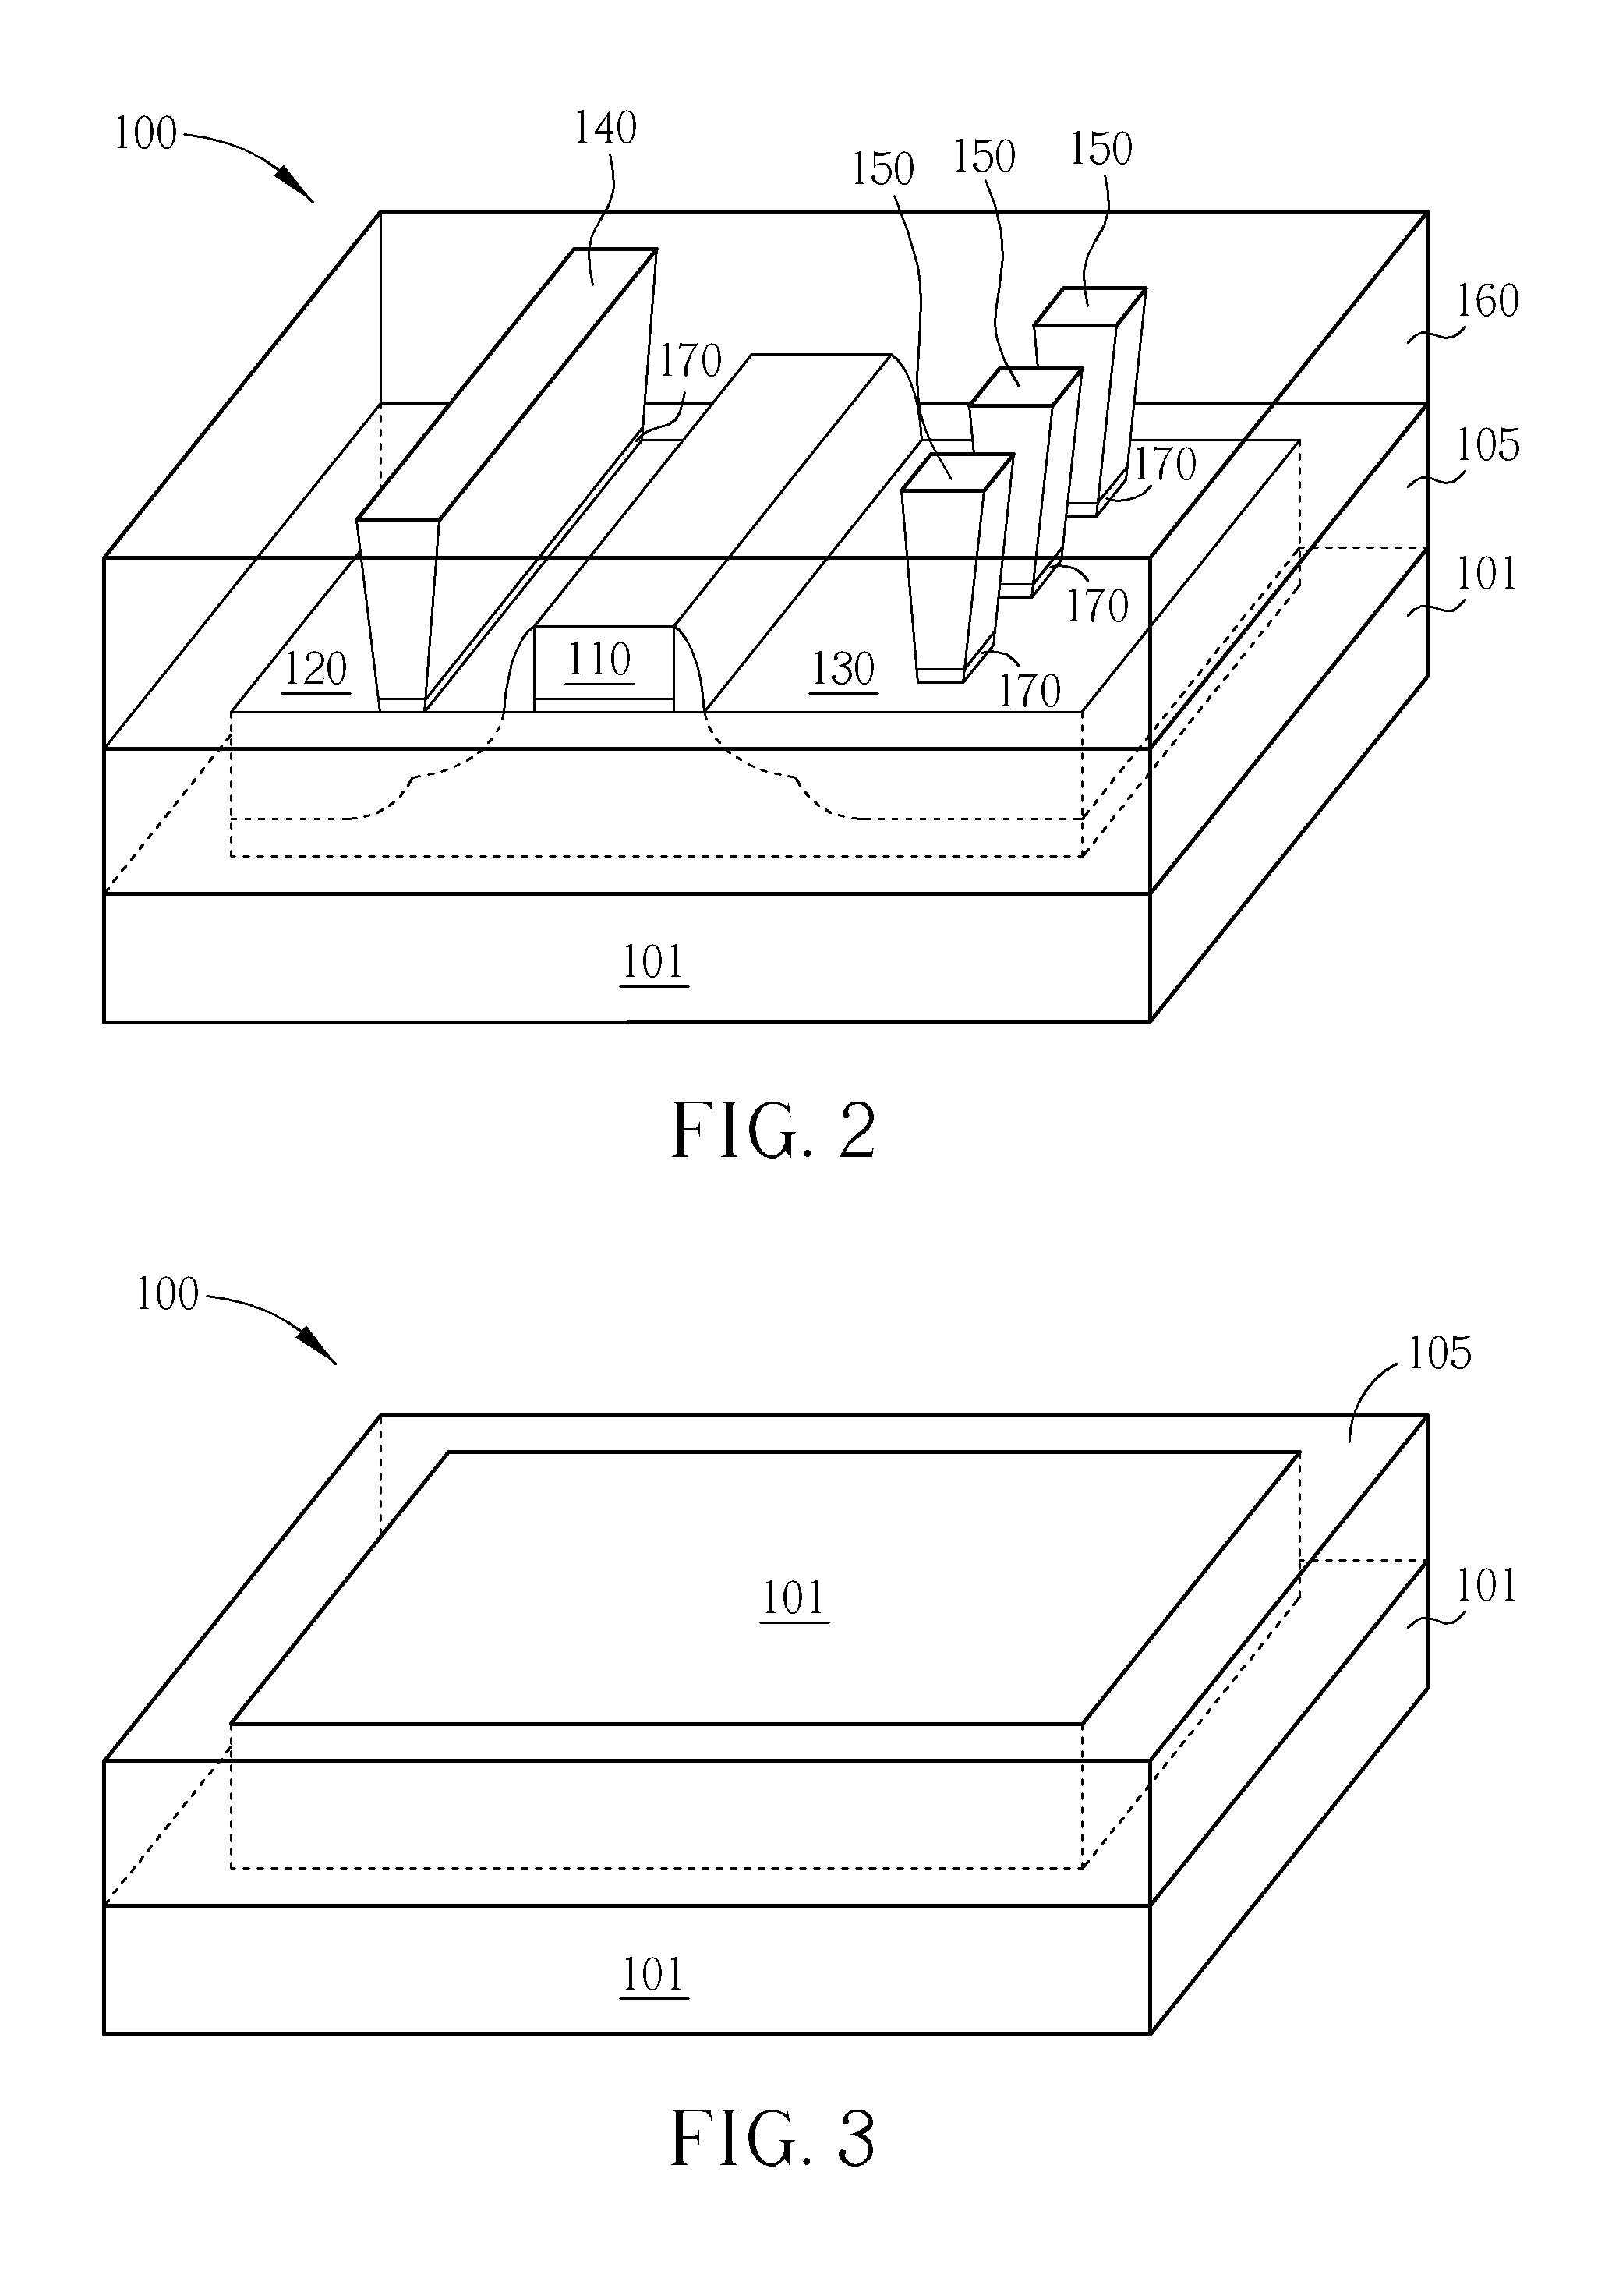 Semiconductor structure and method for making the same